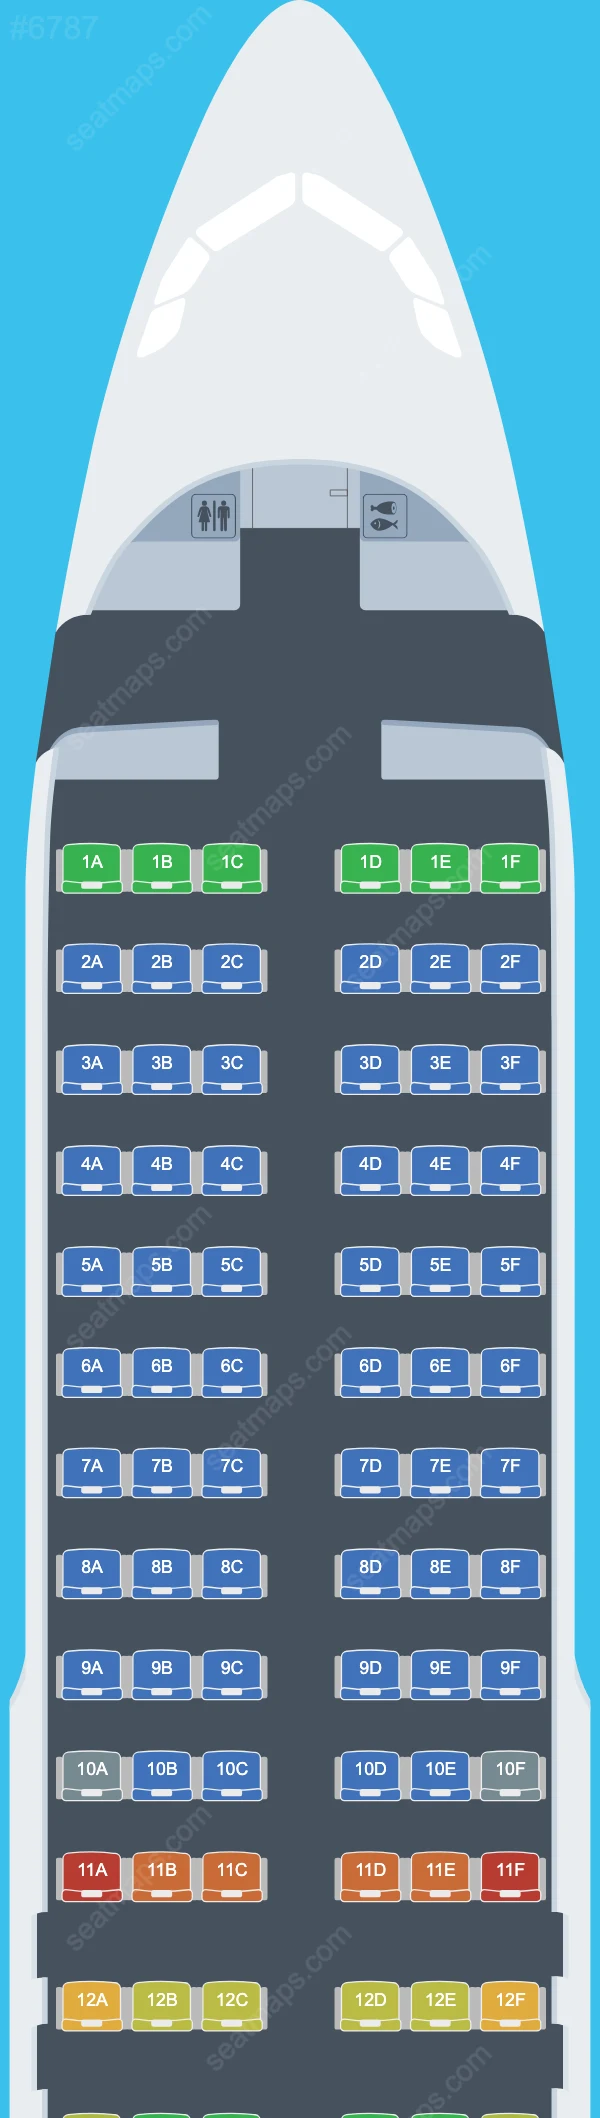 Aruba Airlines Airbus A320 Seat Maps A320-200 V.2